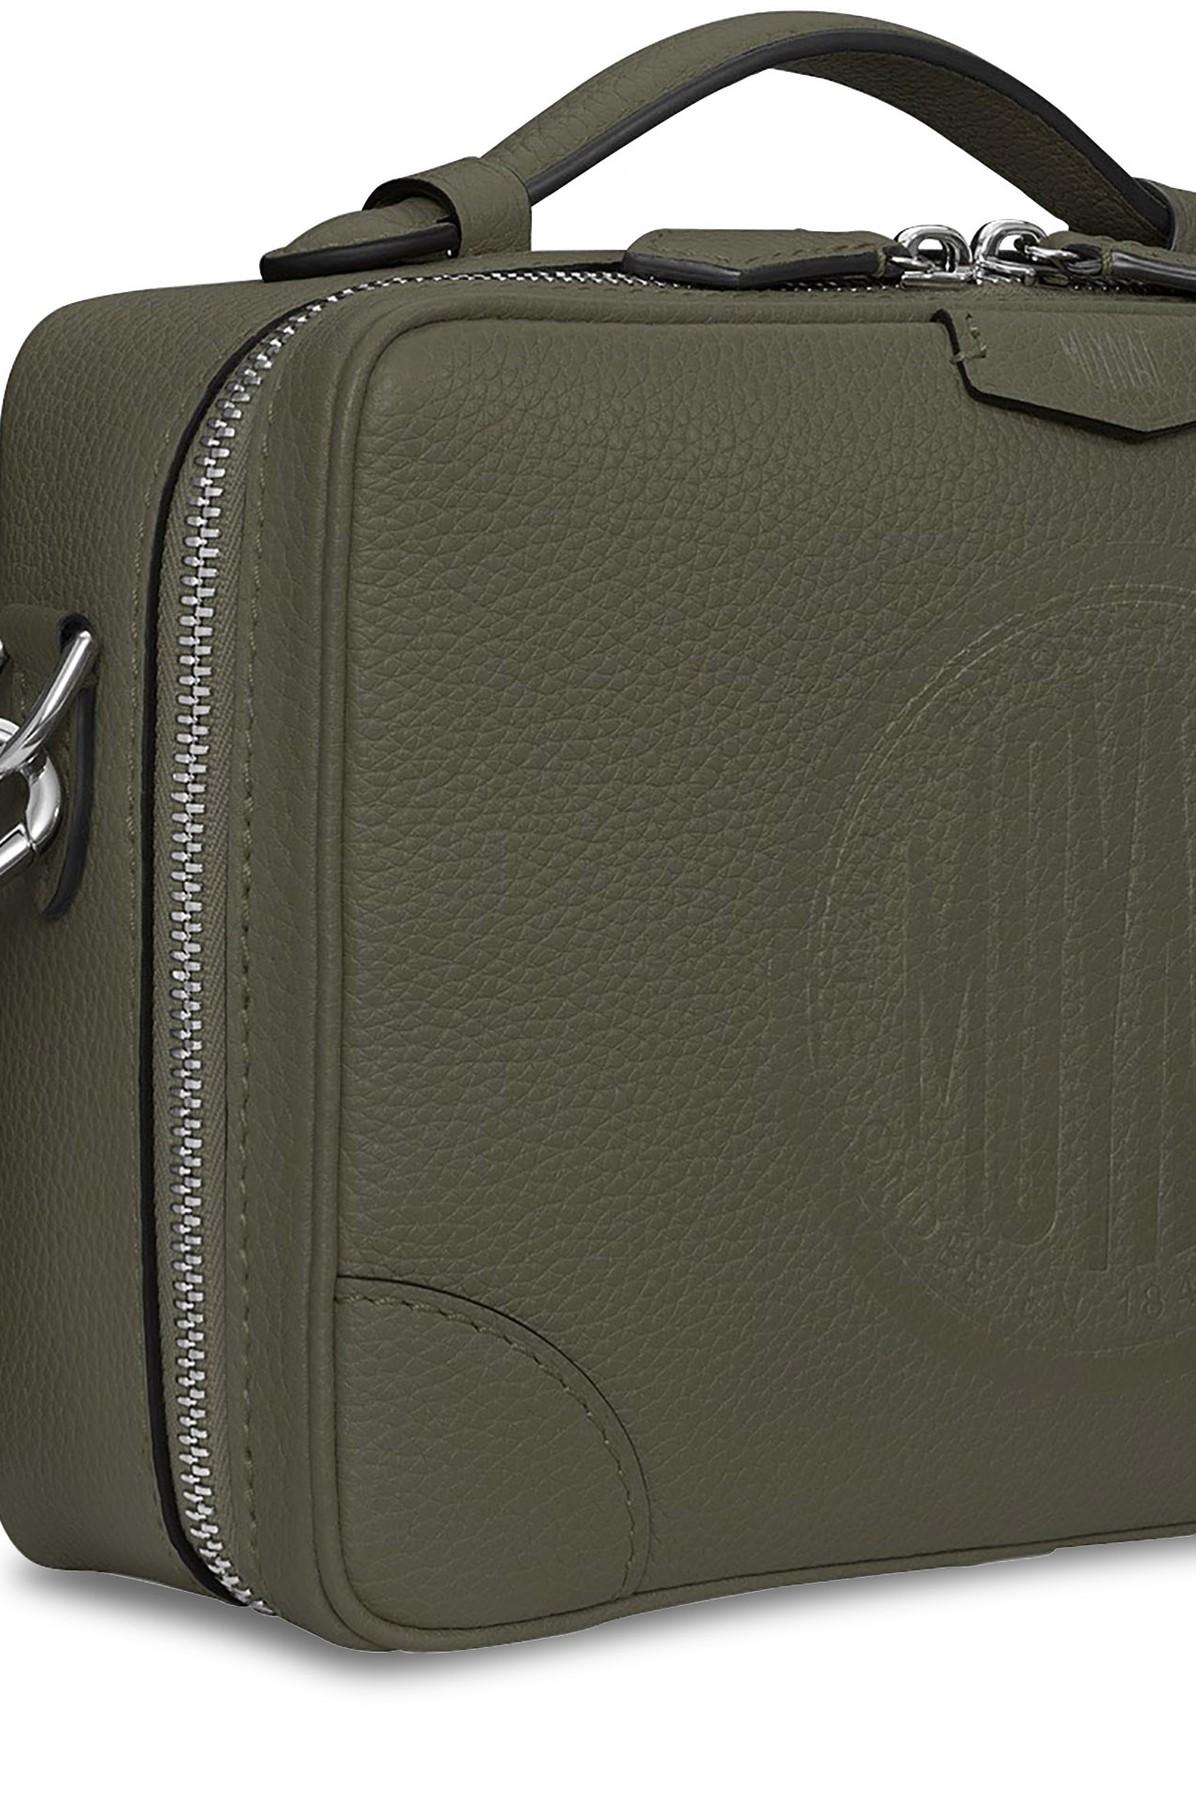 Moynat's Got A New Camera Bag You Need To Check Out - BAGAHOLICBOY